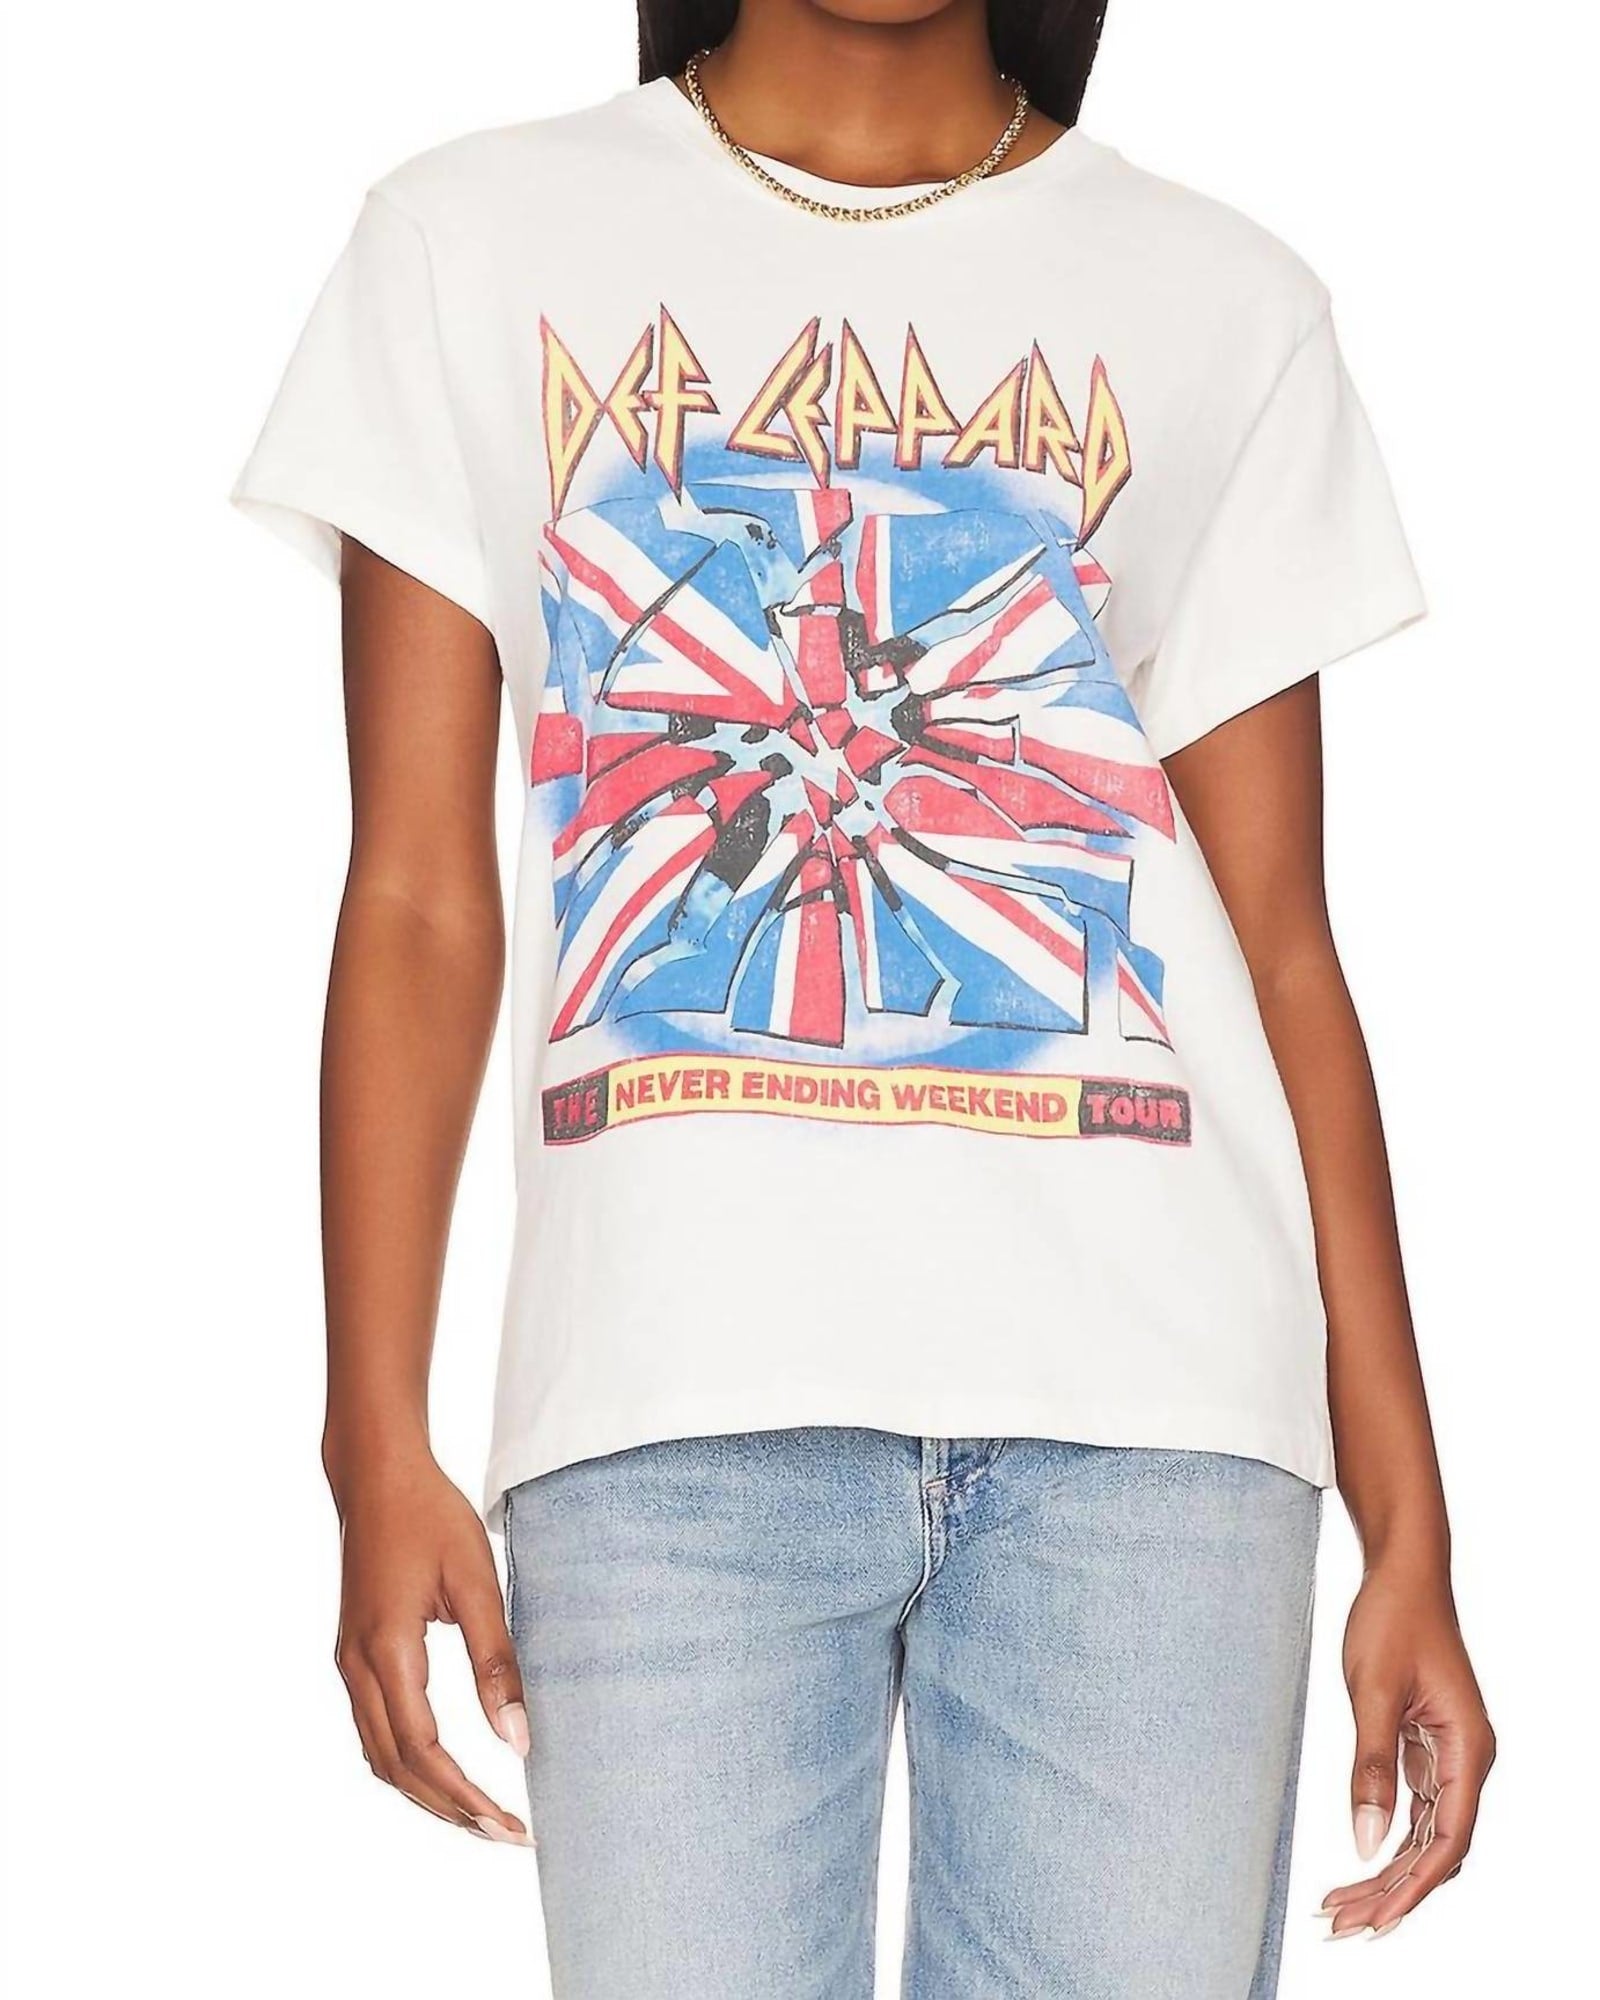 Def Leppard 1993 Never Ending Weekend Tour Tee in Vintage White | Vintage White